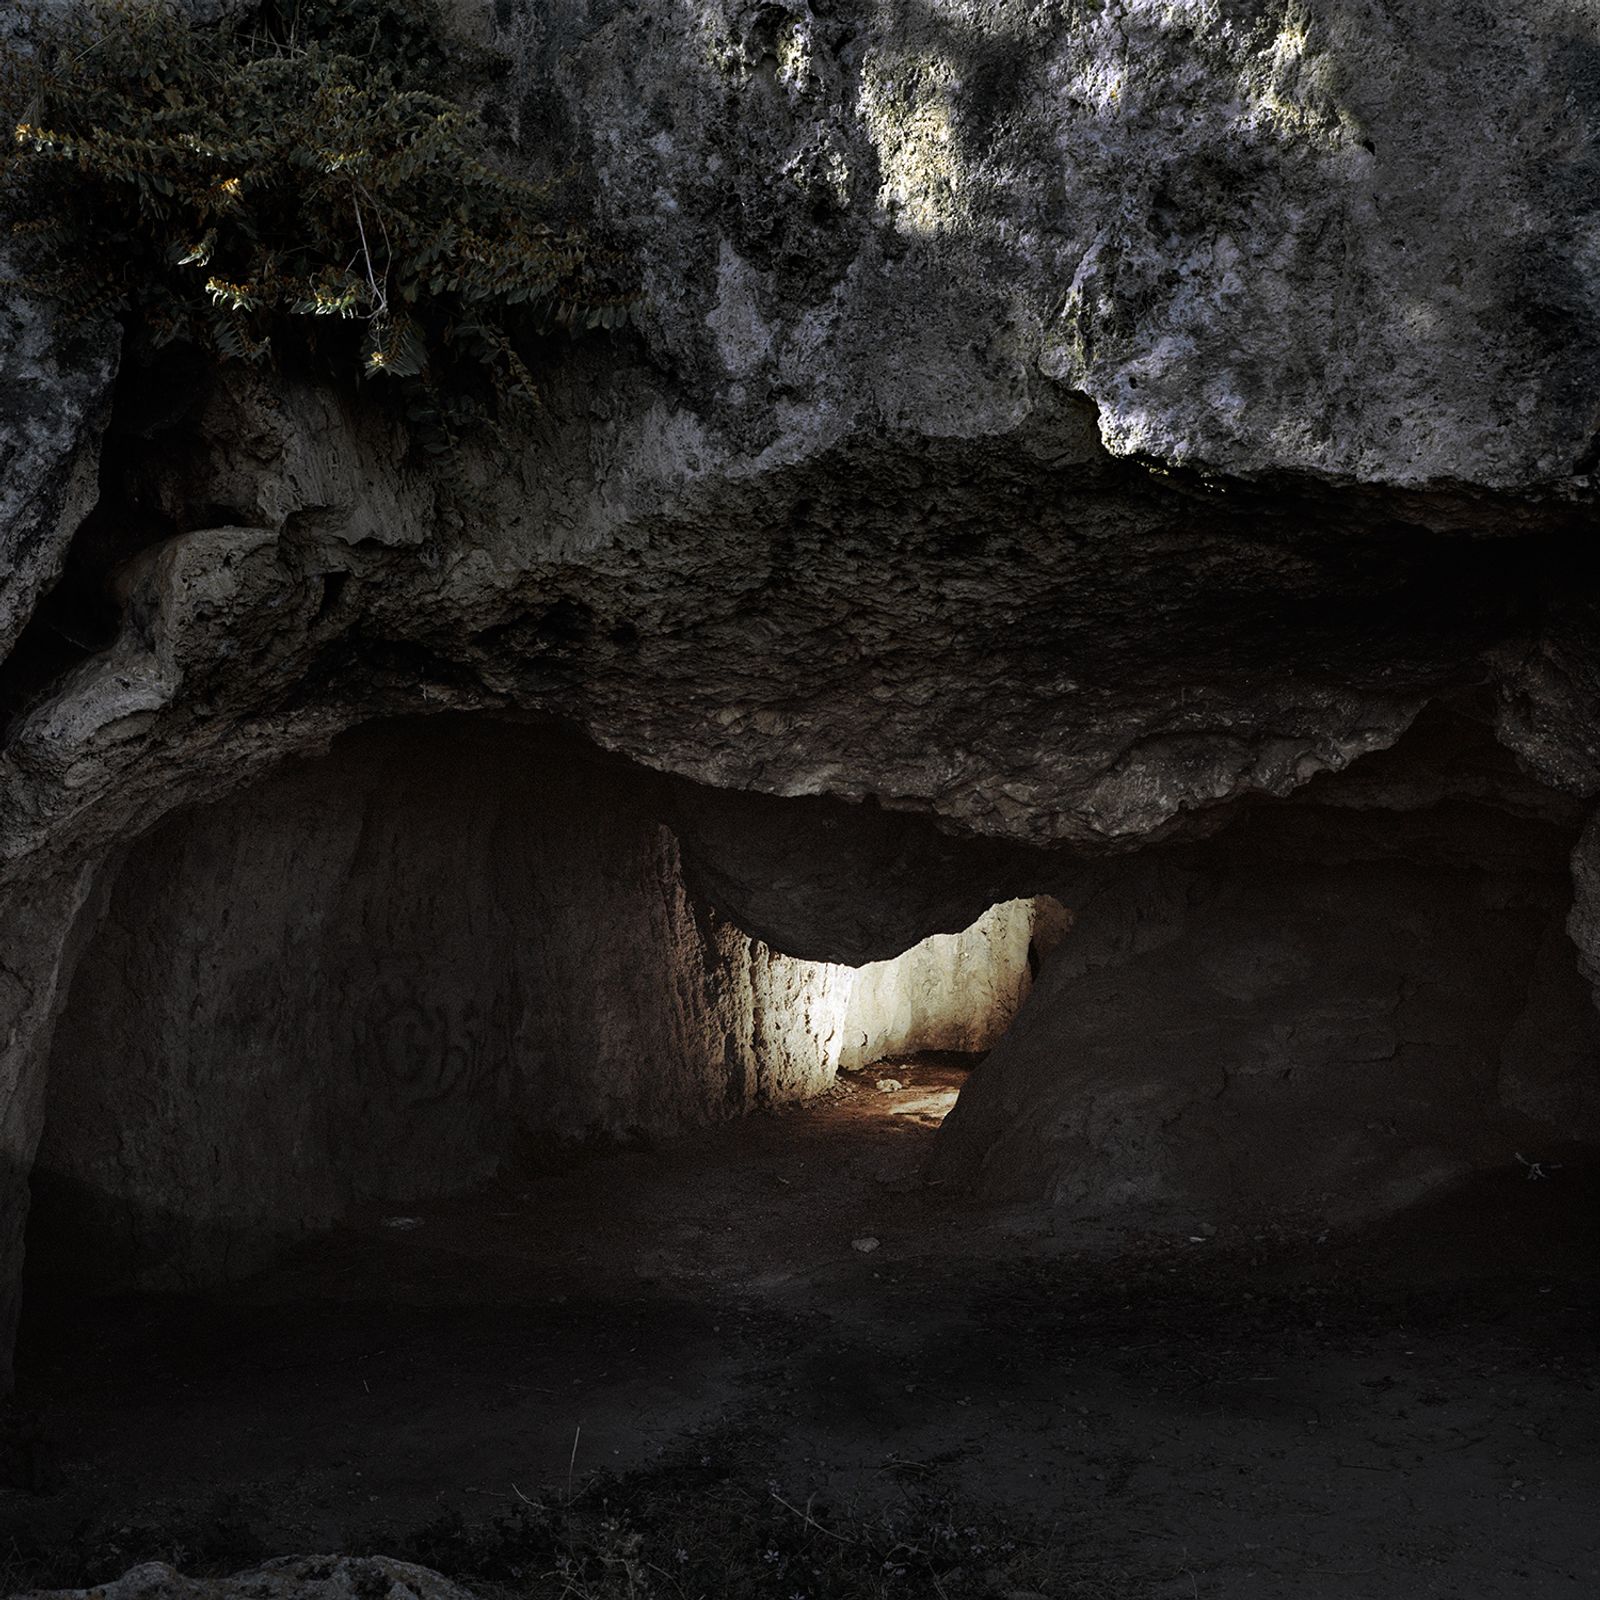 © Thanos Kostikos - Image from the Legend says gold lies beneath the riverbed photography project